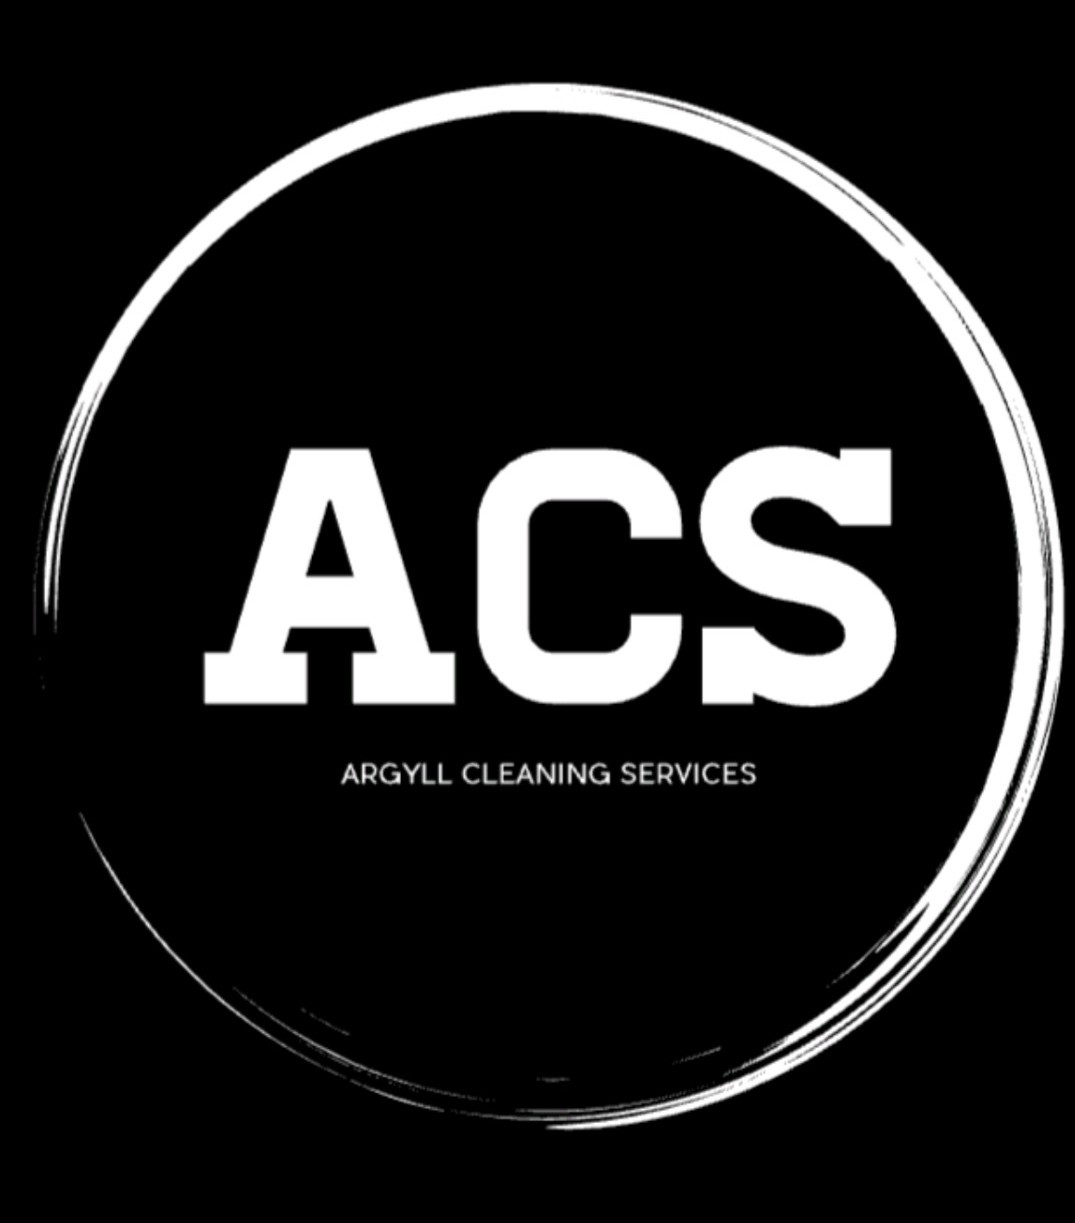 Argyll Cleaning Services Featured Image